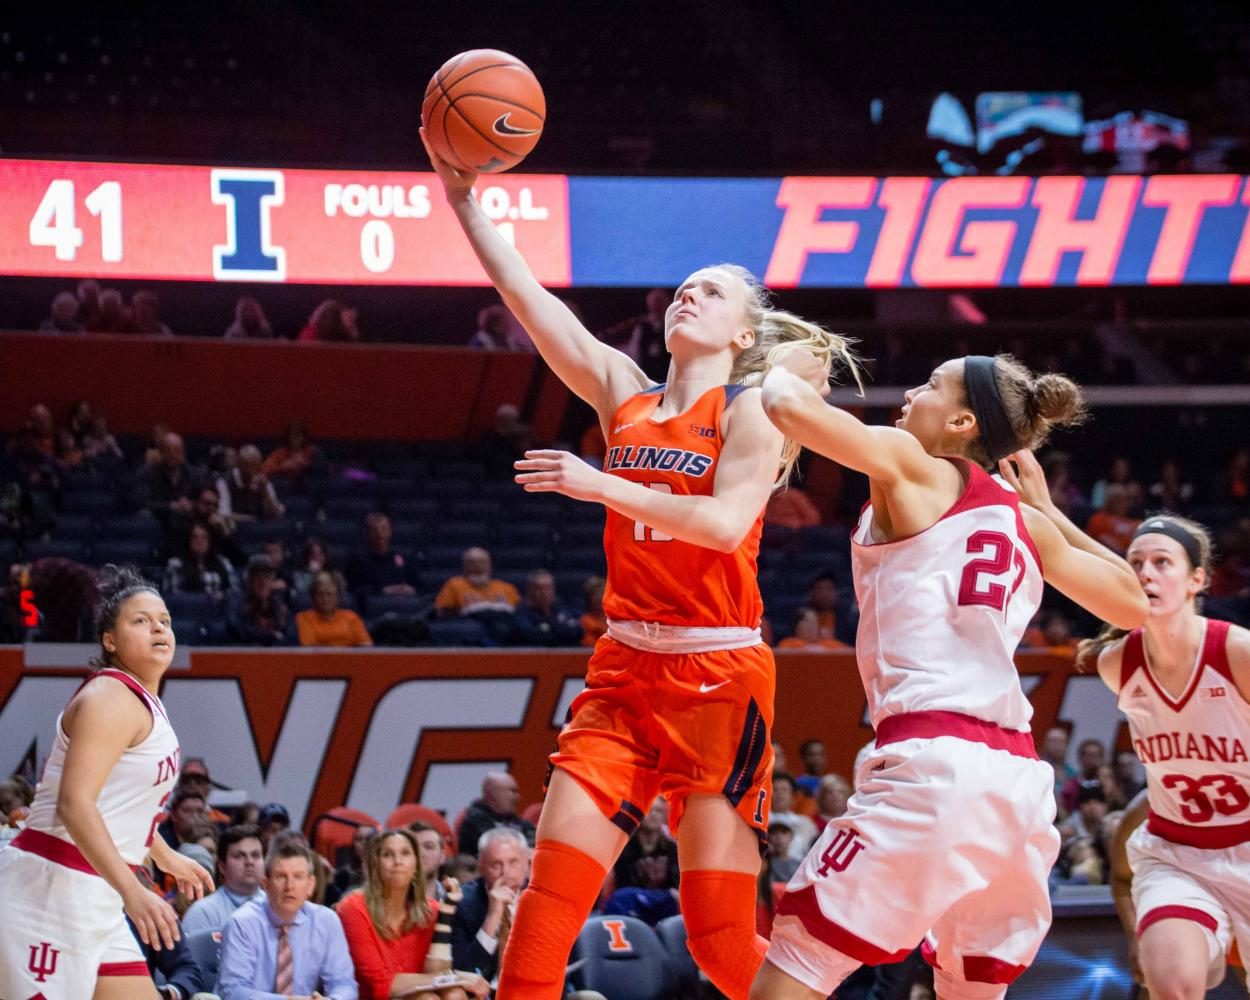 Illinois’ Petra Holešínská goes up for a layup during the game against Indiana at State Farm Center Feb. 25.